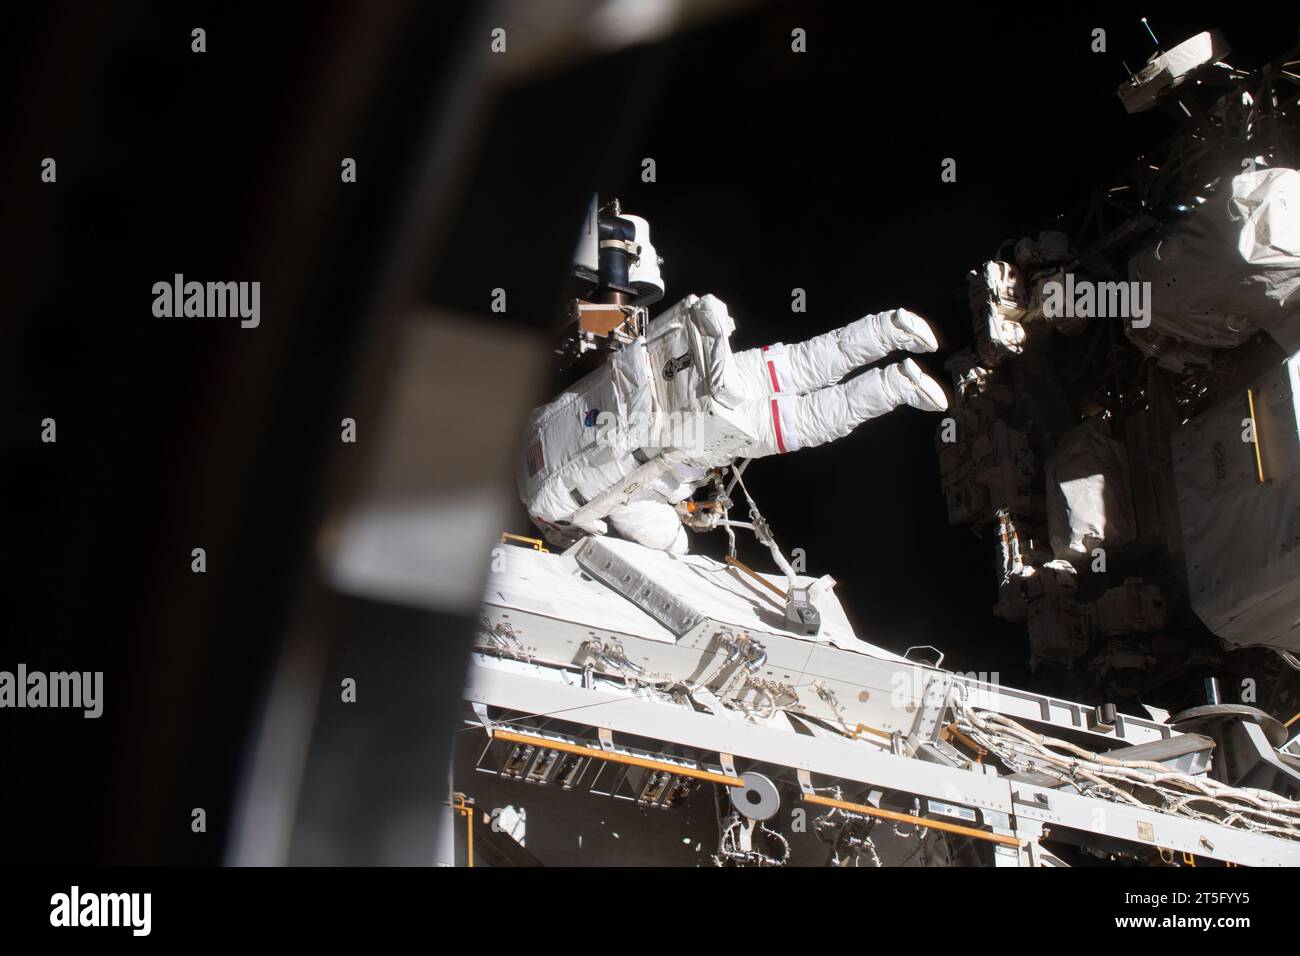 International Space Station, Earth Orbit. 01 November, 2023. NASA astronaut and Expedition 70 Flight Engineer Jasmin Moghbeli performs a spacewalk to replace one of the 12 trundle bearing assemblies on the port solar alpha rotary joint, outside the International Space Station, November 1, 2023 in Earth Orbit. The assembly allows the solar arrays to track the Sun and generate electricity to power the orbiting laboratory. Credit: NASA Astronaut/NASA/Alamy Live News Stock Photo